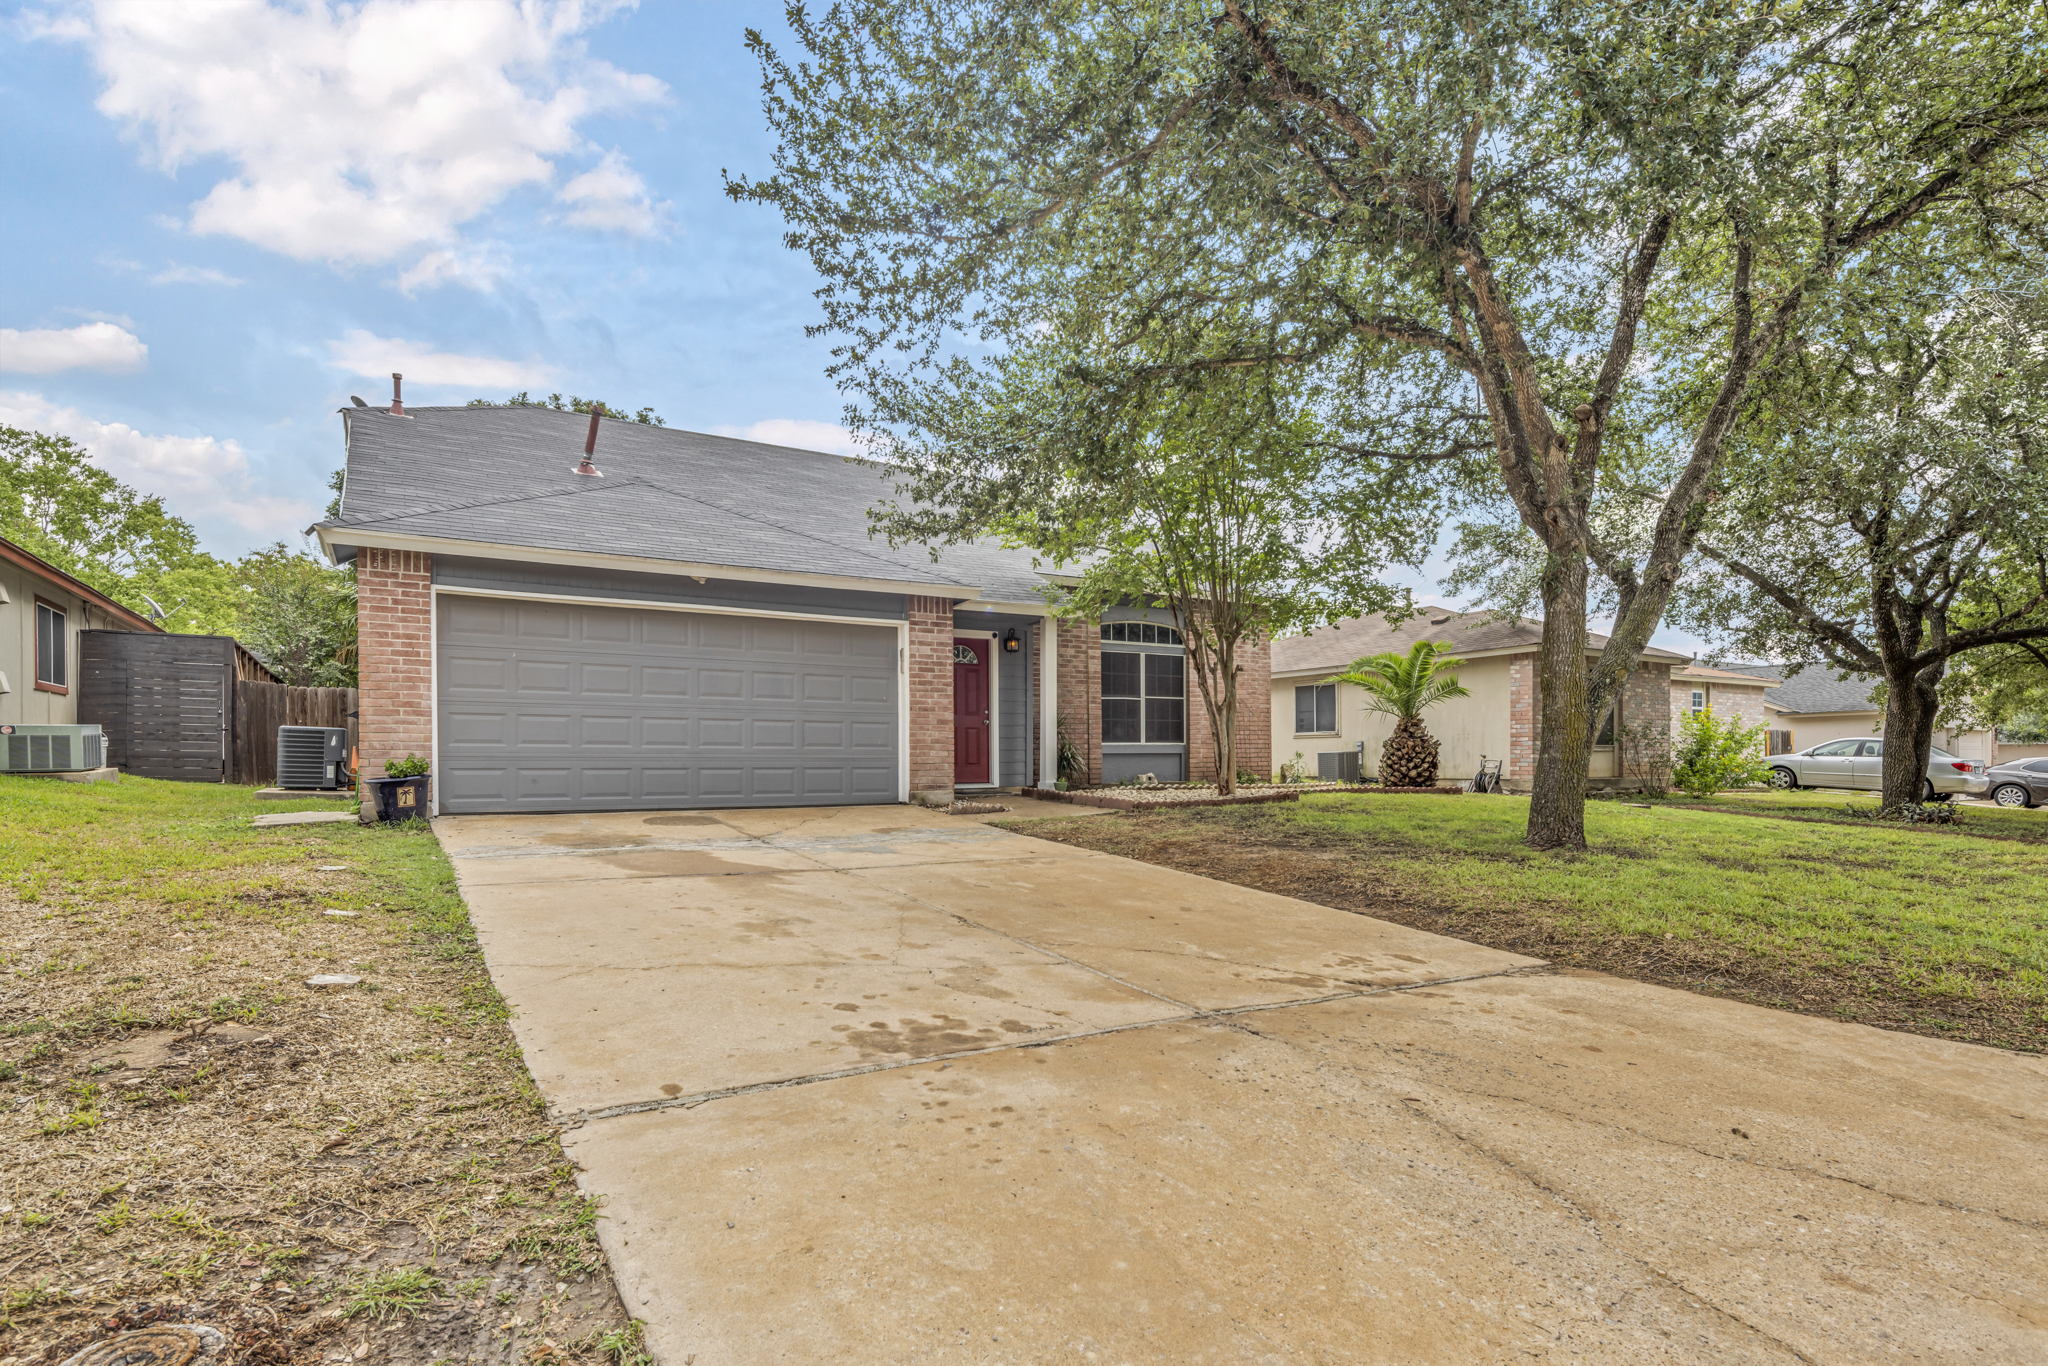 7001 Hewers Dr, Del Valle, TX 78617